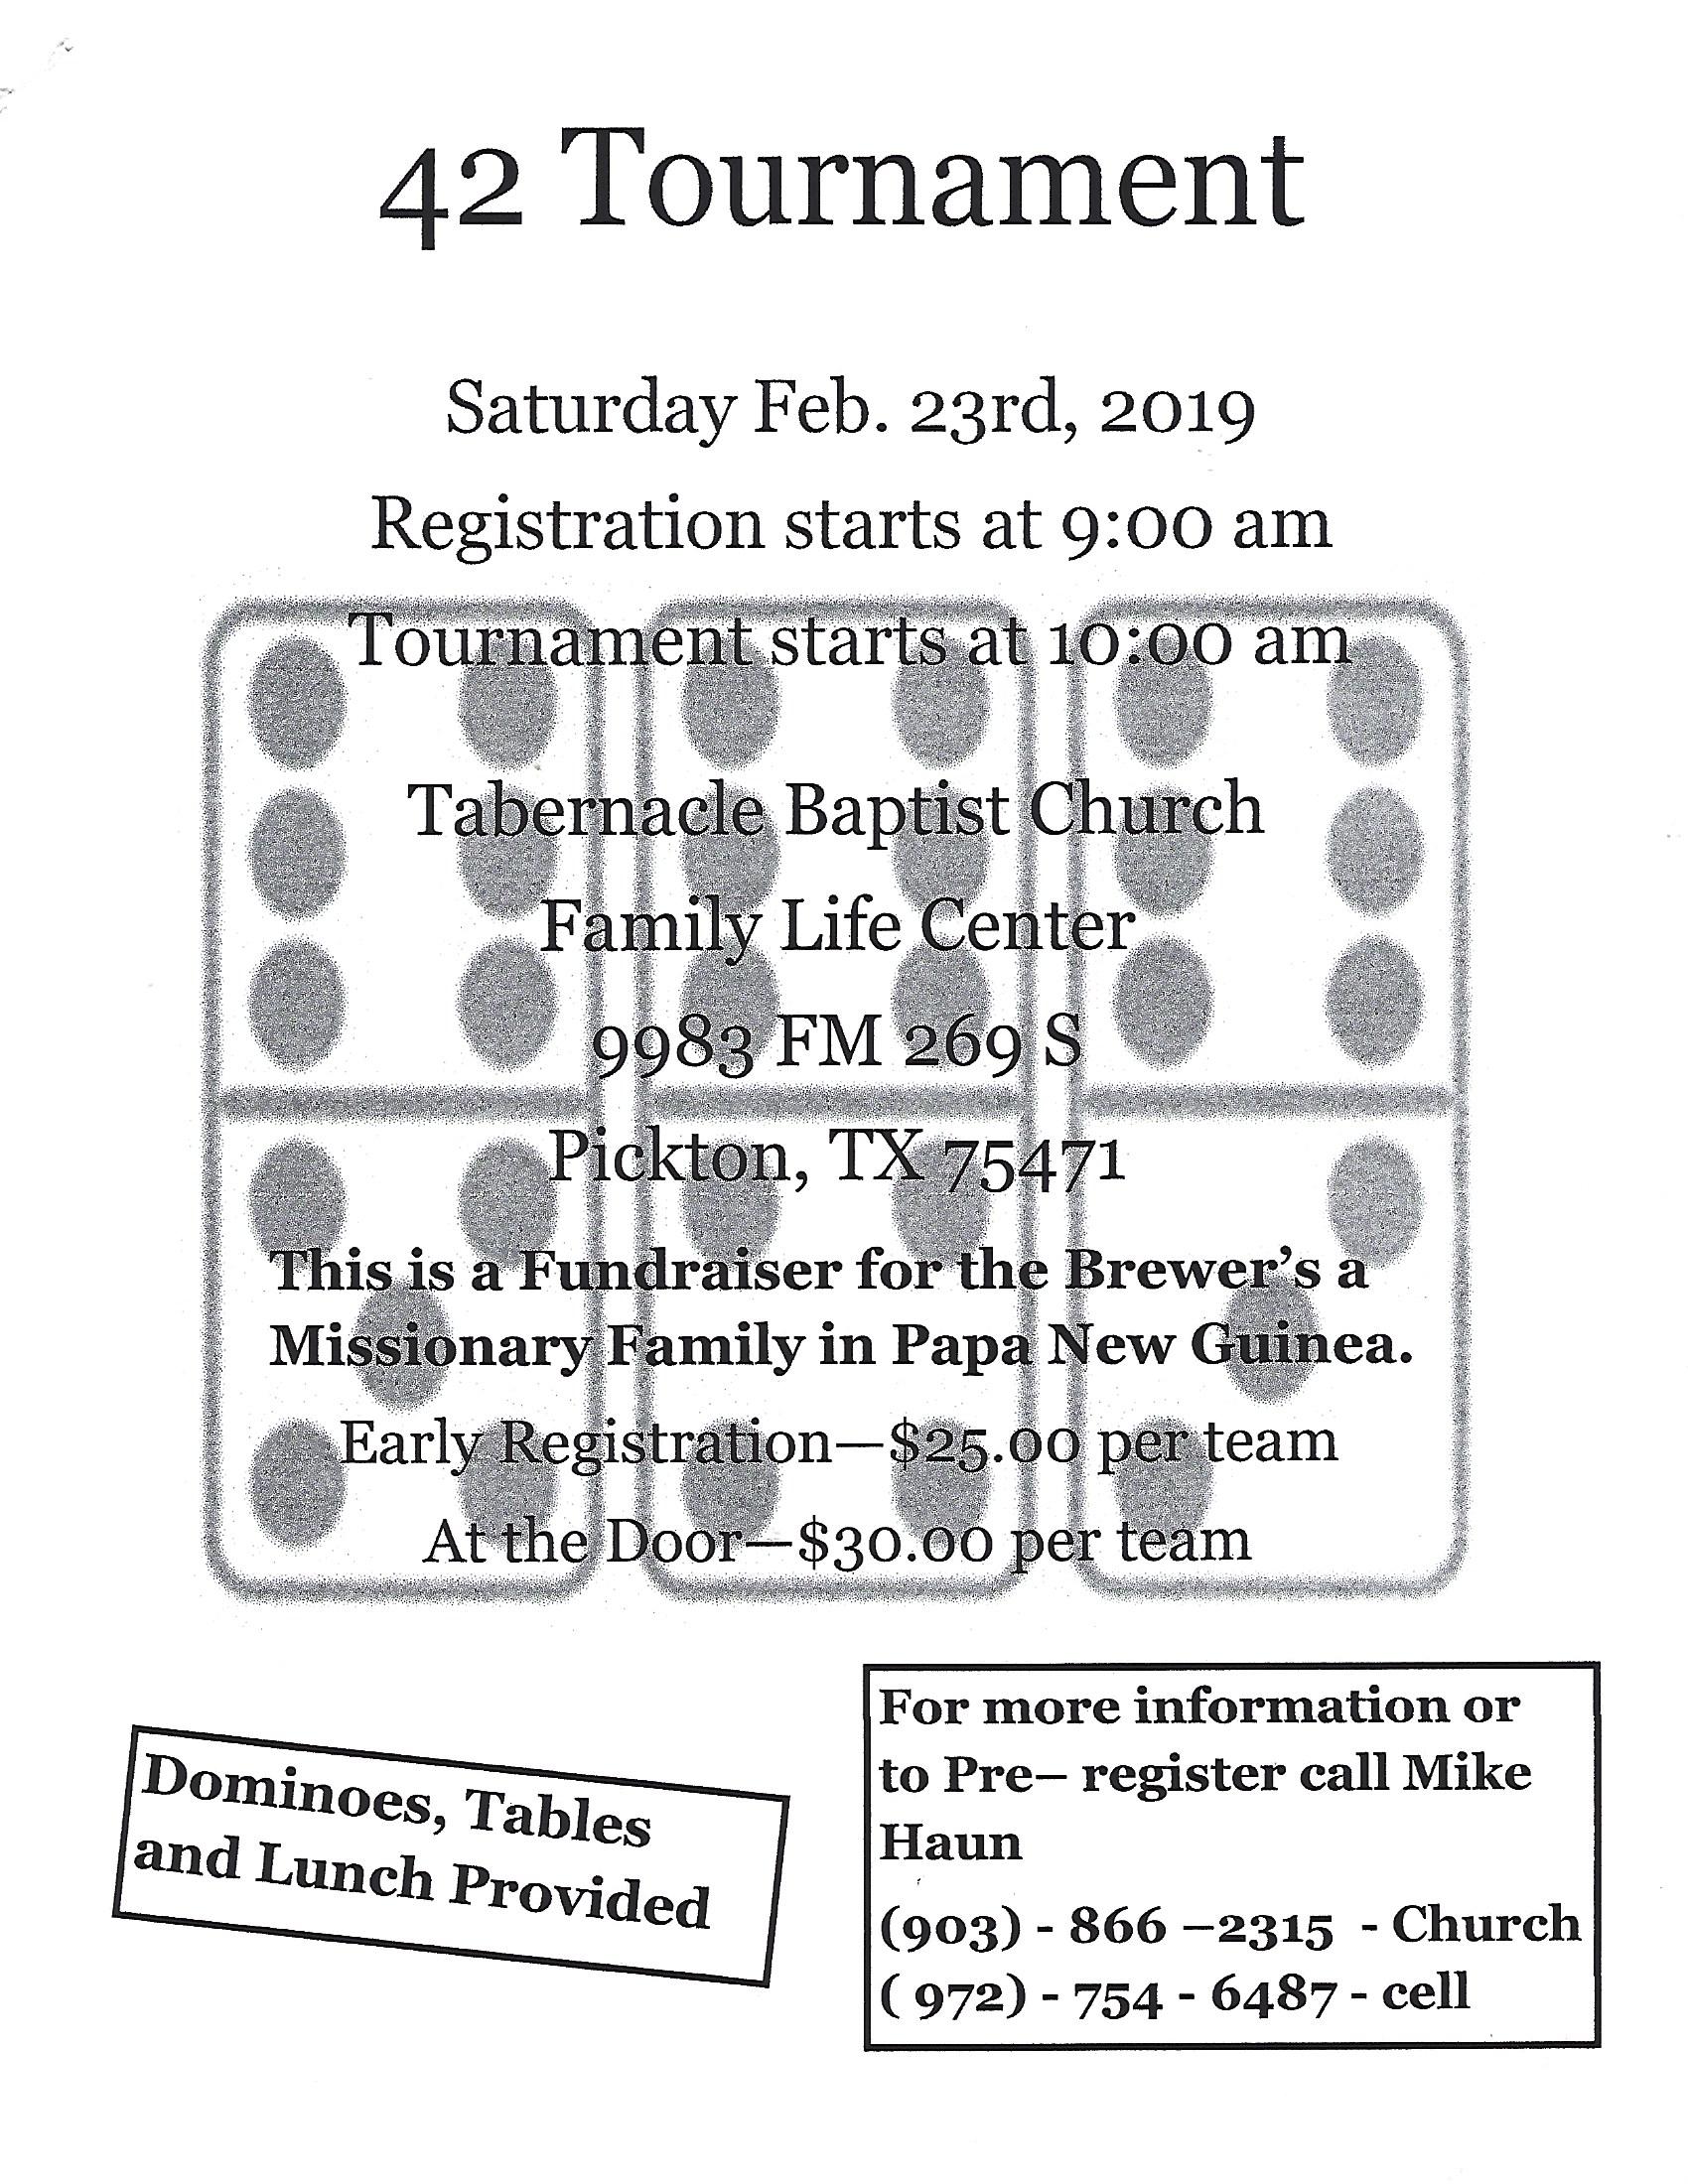 Tabernacle Baptist Church in Pickton Hosting 42 Tournament on Saturday, February 23rd